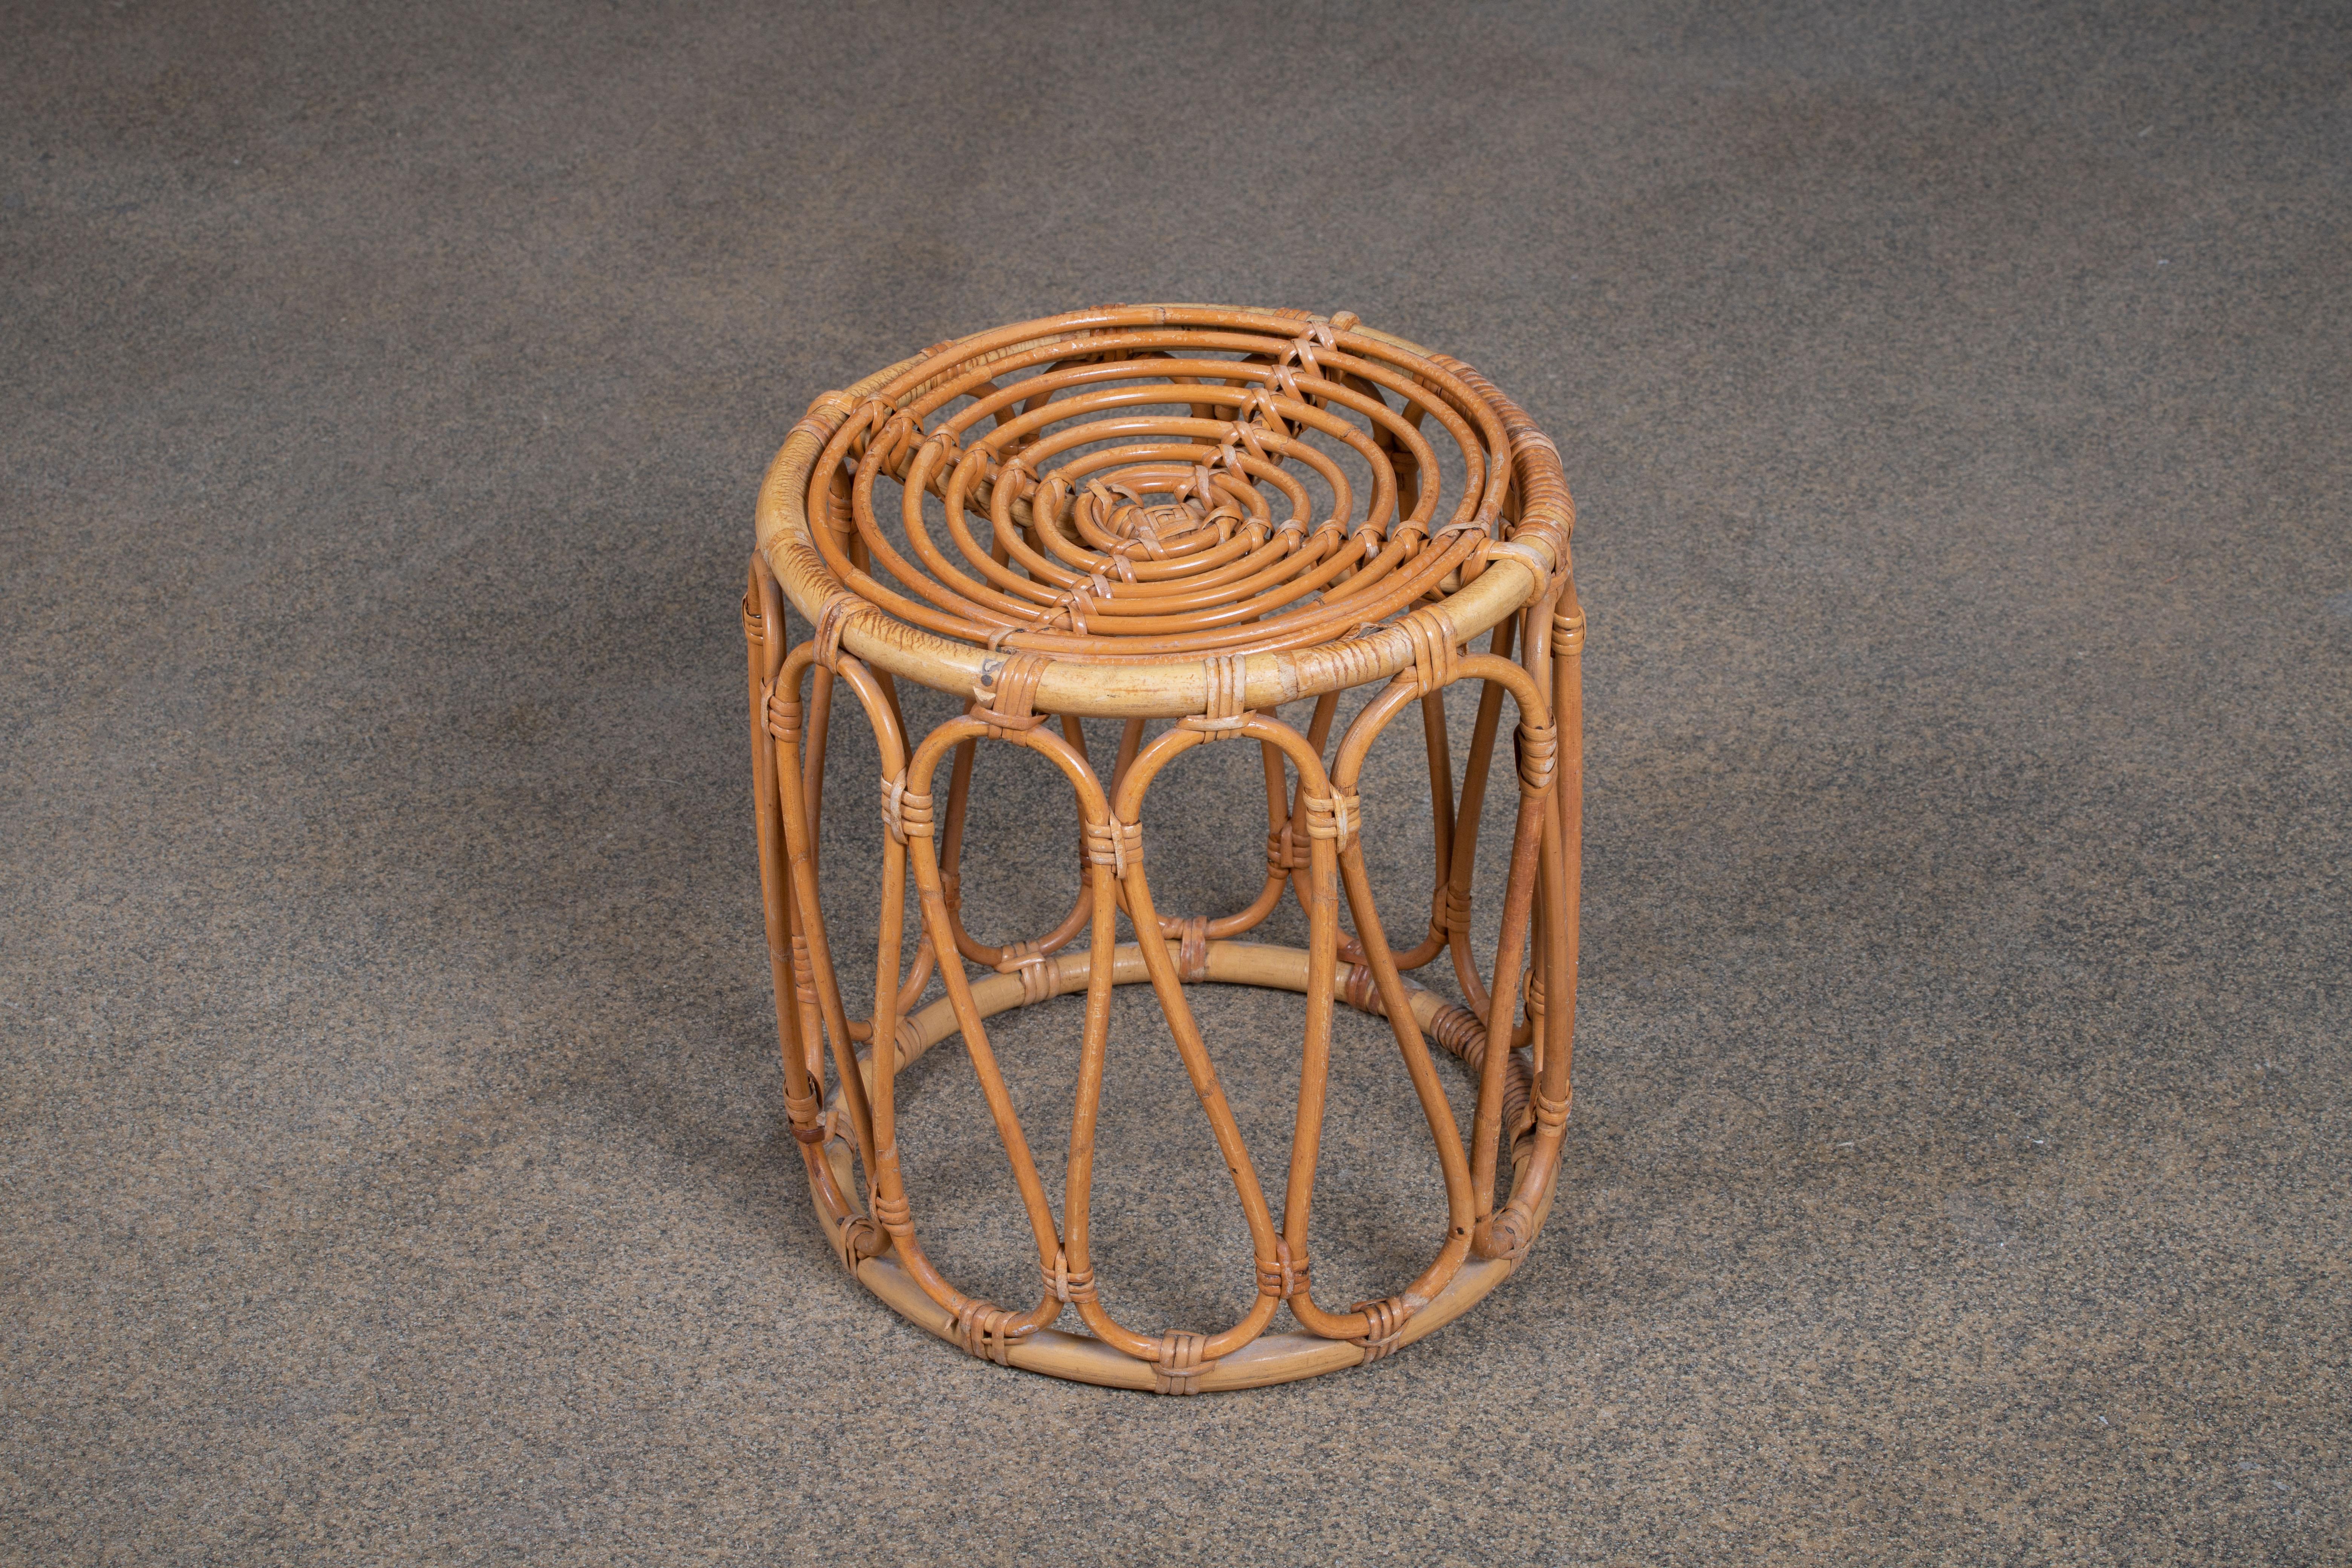 A lovely magazine rack made of high quality rattan in the style of Franco Albini, manufactured in Italy around 1950. This elegant piece has very nicely curved shapes, nicely integrated into a practical and stylish magazine holder! 
It remains in